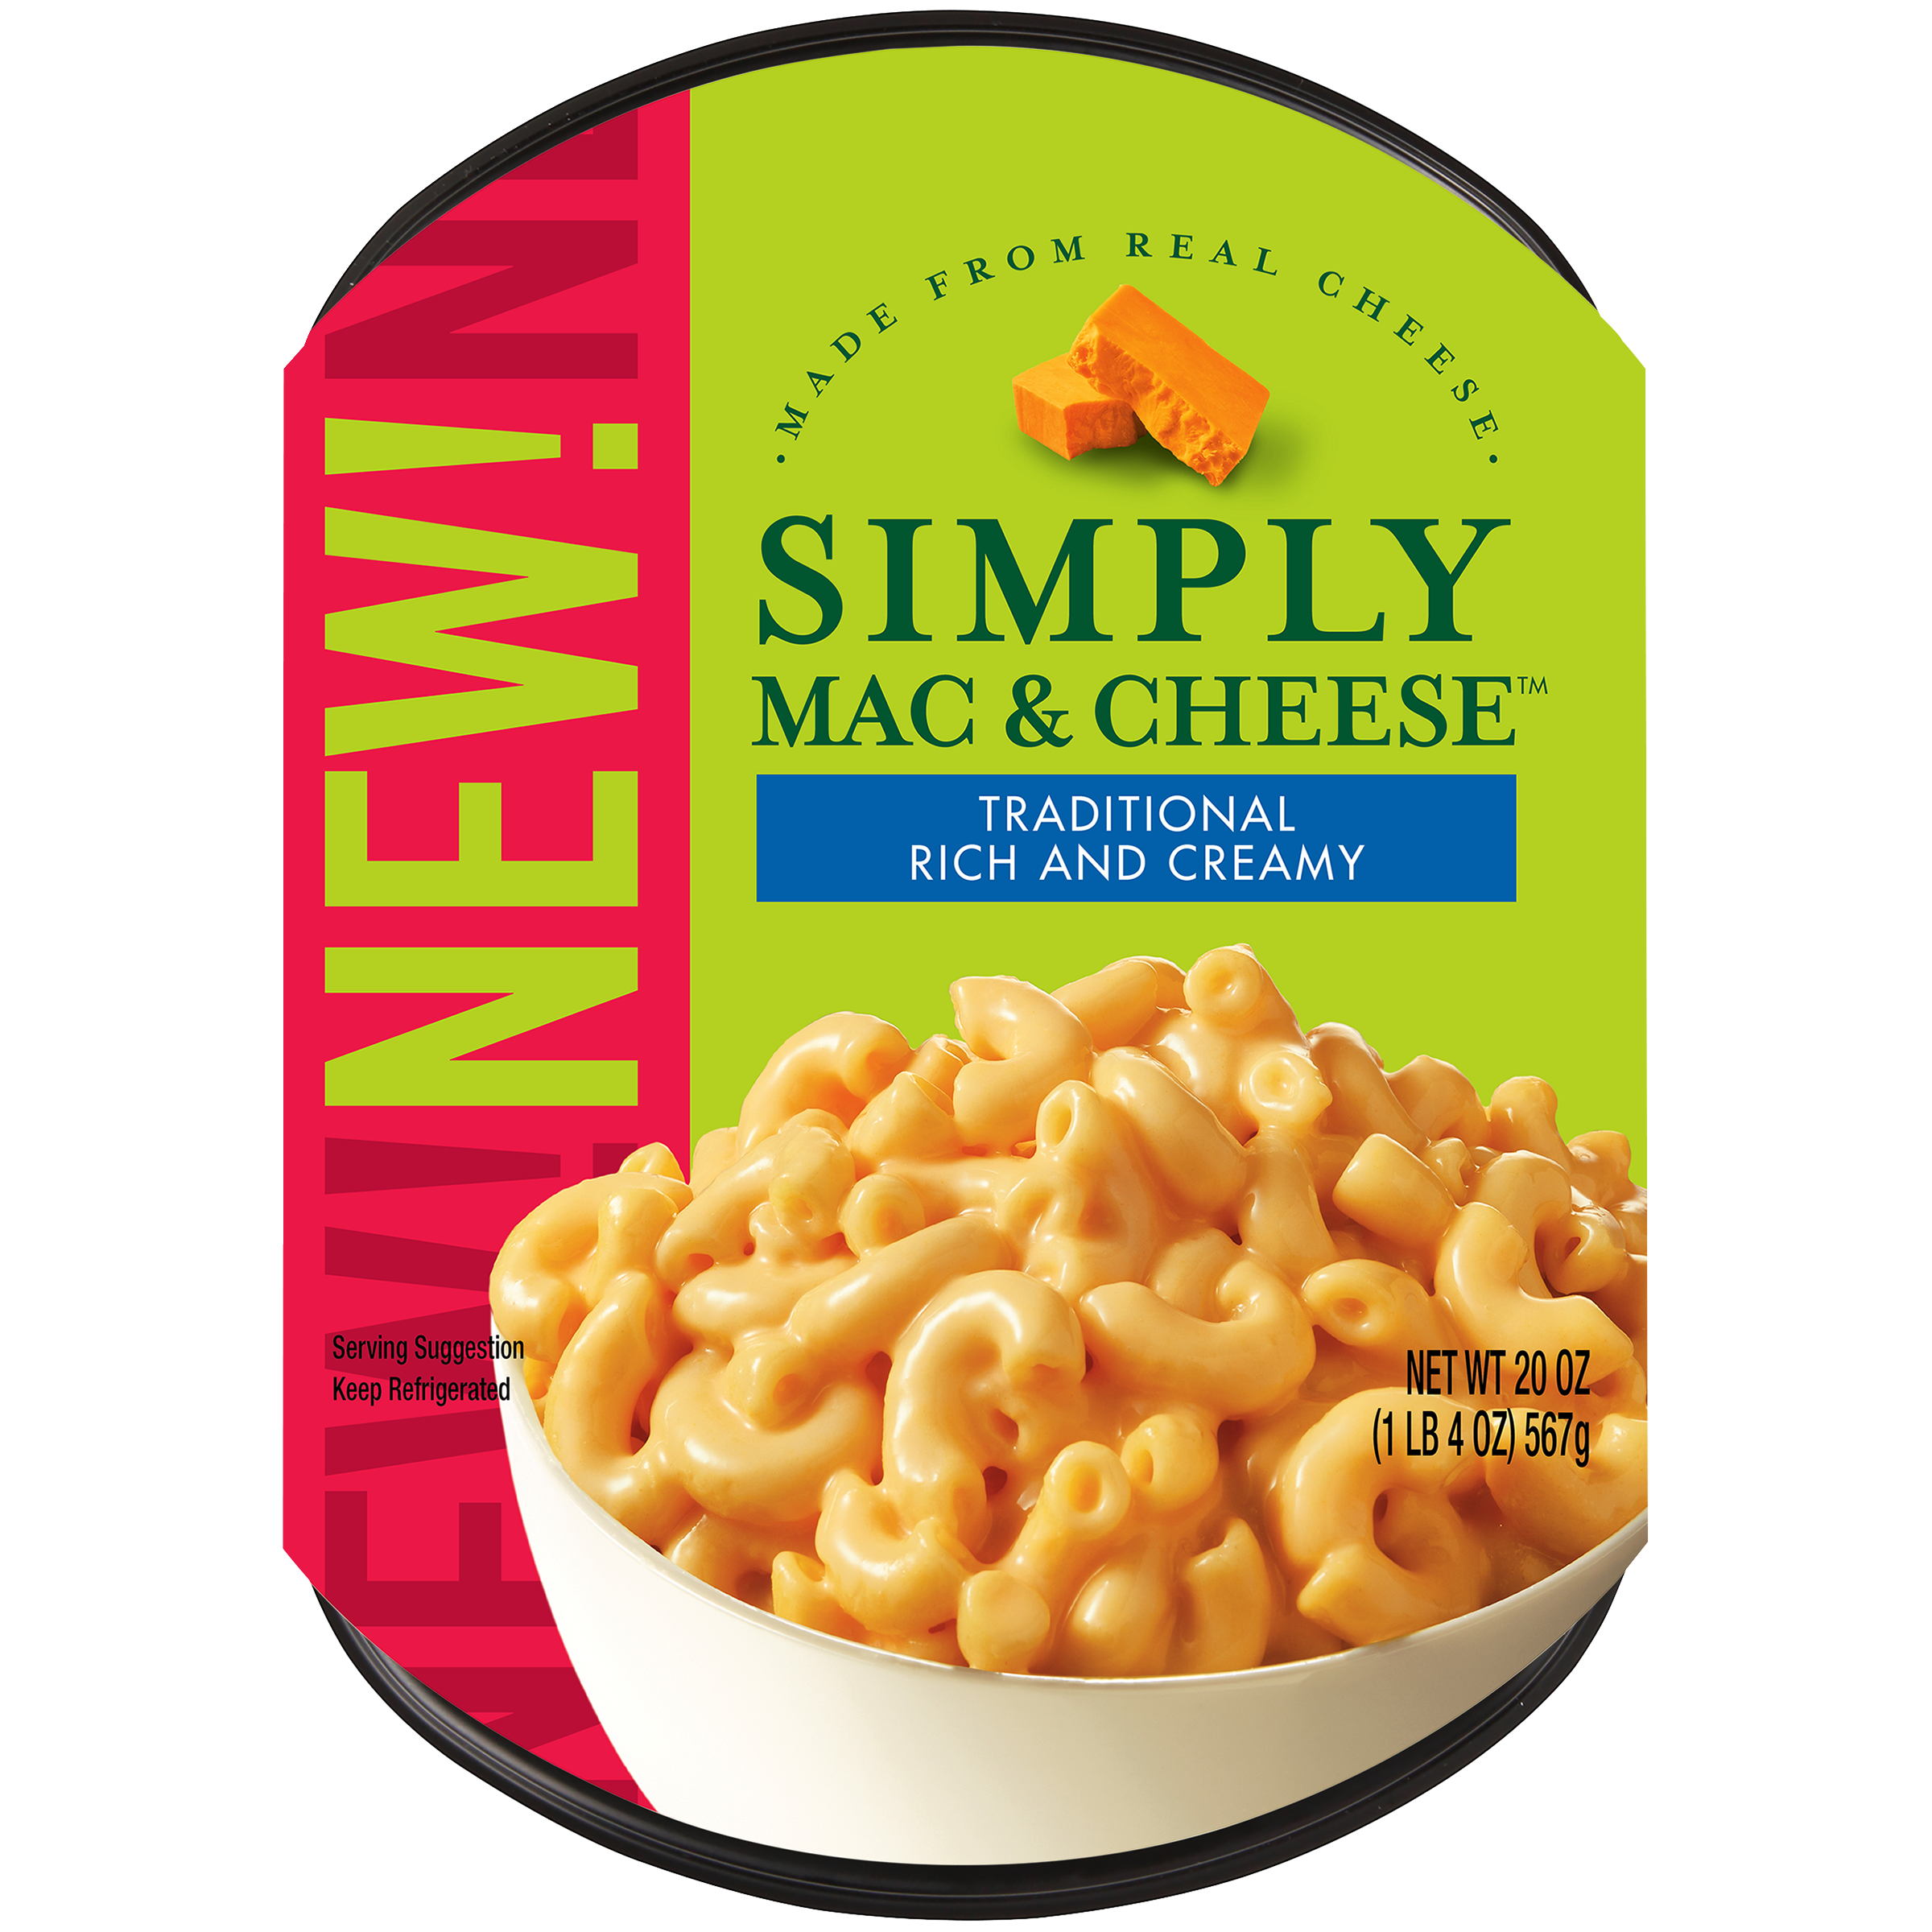 photo of Simply Mac & Cheese product